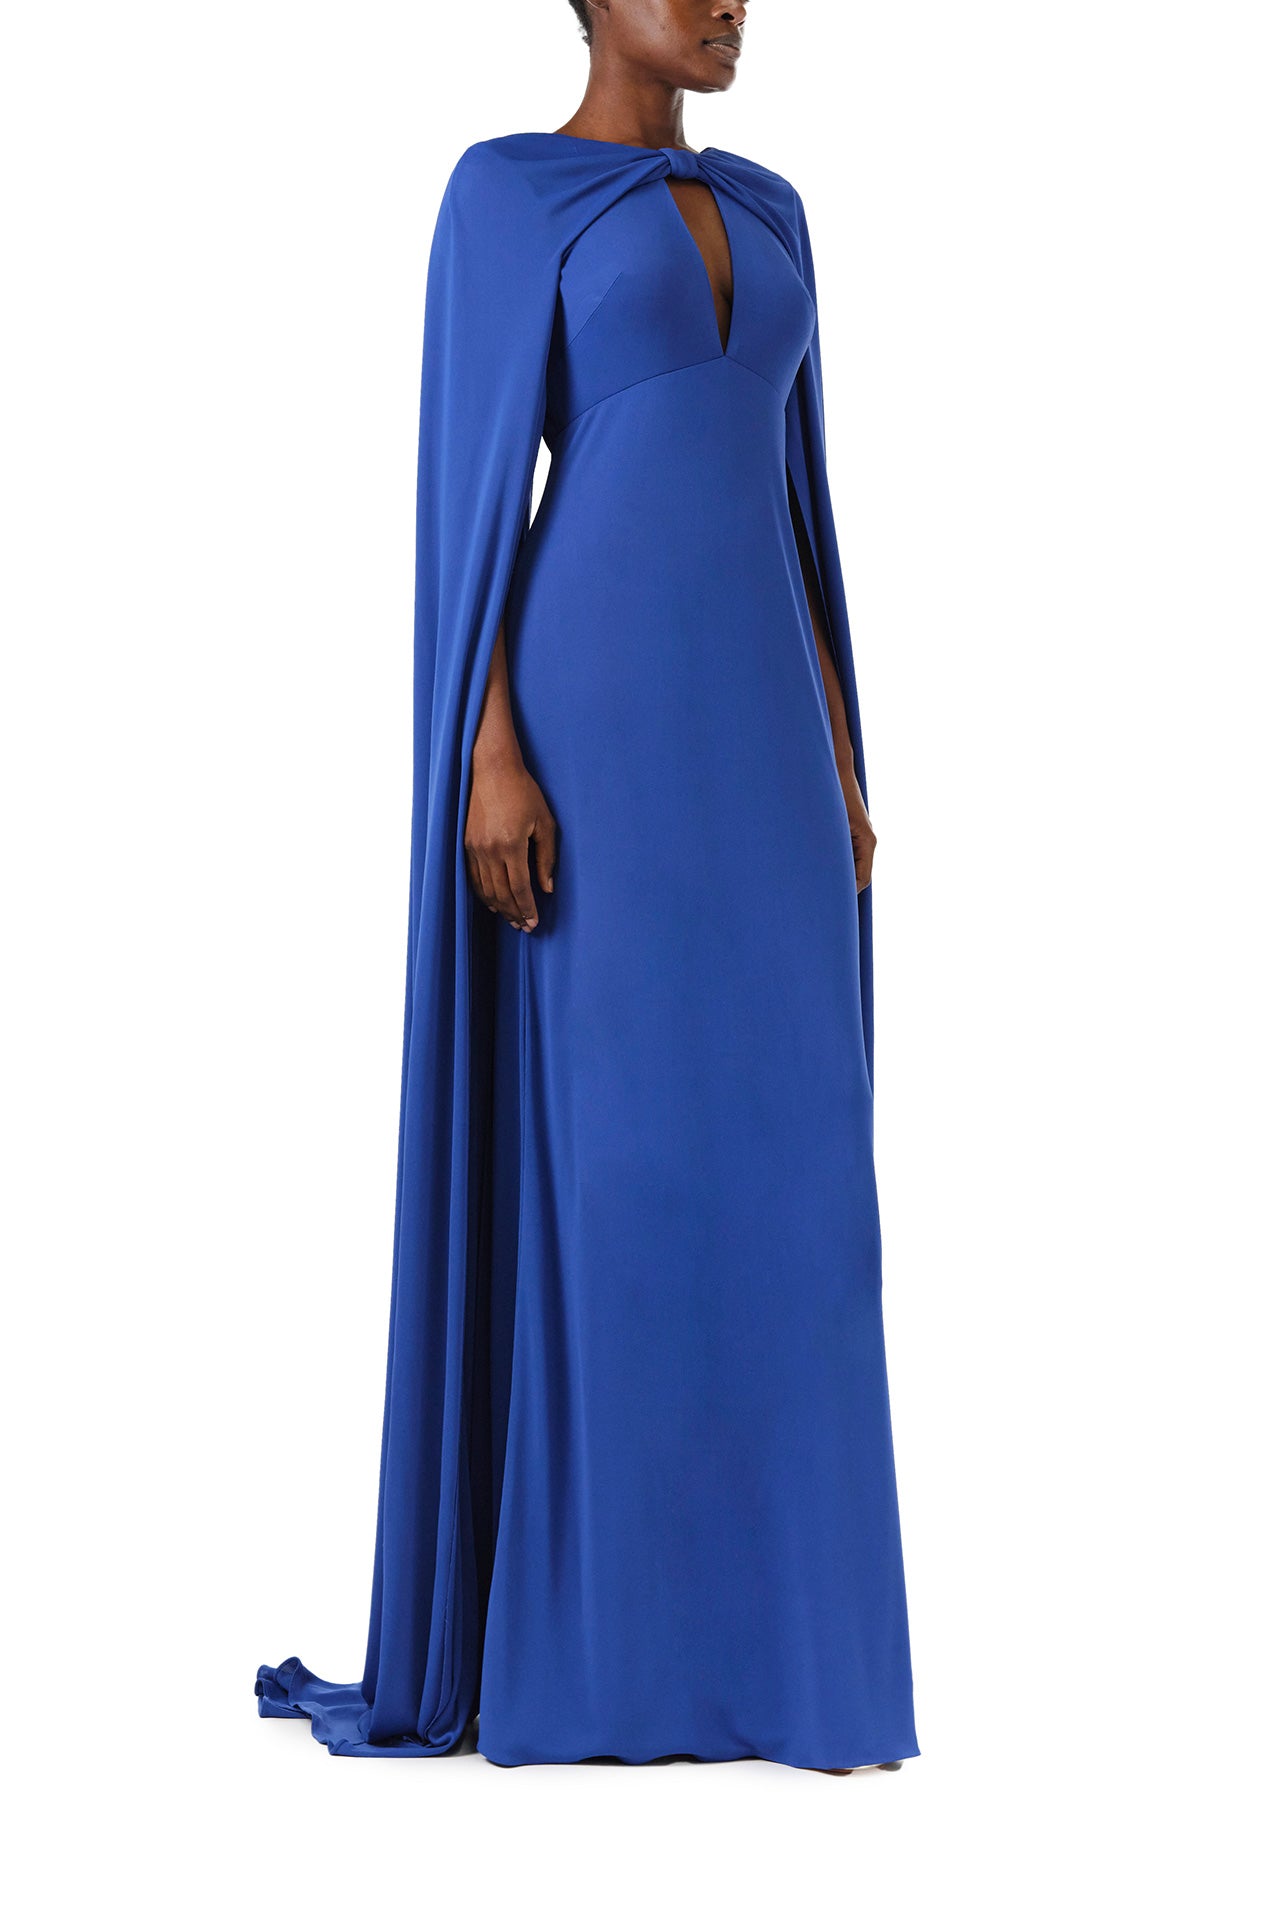 Monique Lhuillier Spring 2024 royal blue crepe-back satin gown with attached cape and keyhole bodice - right side.